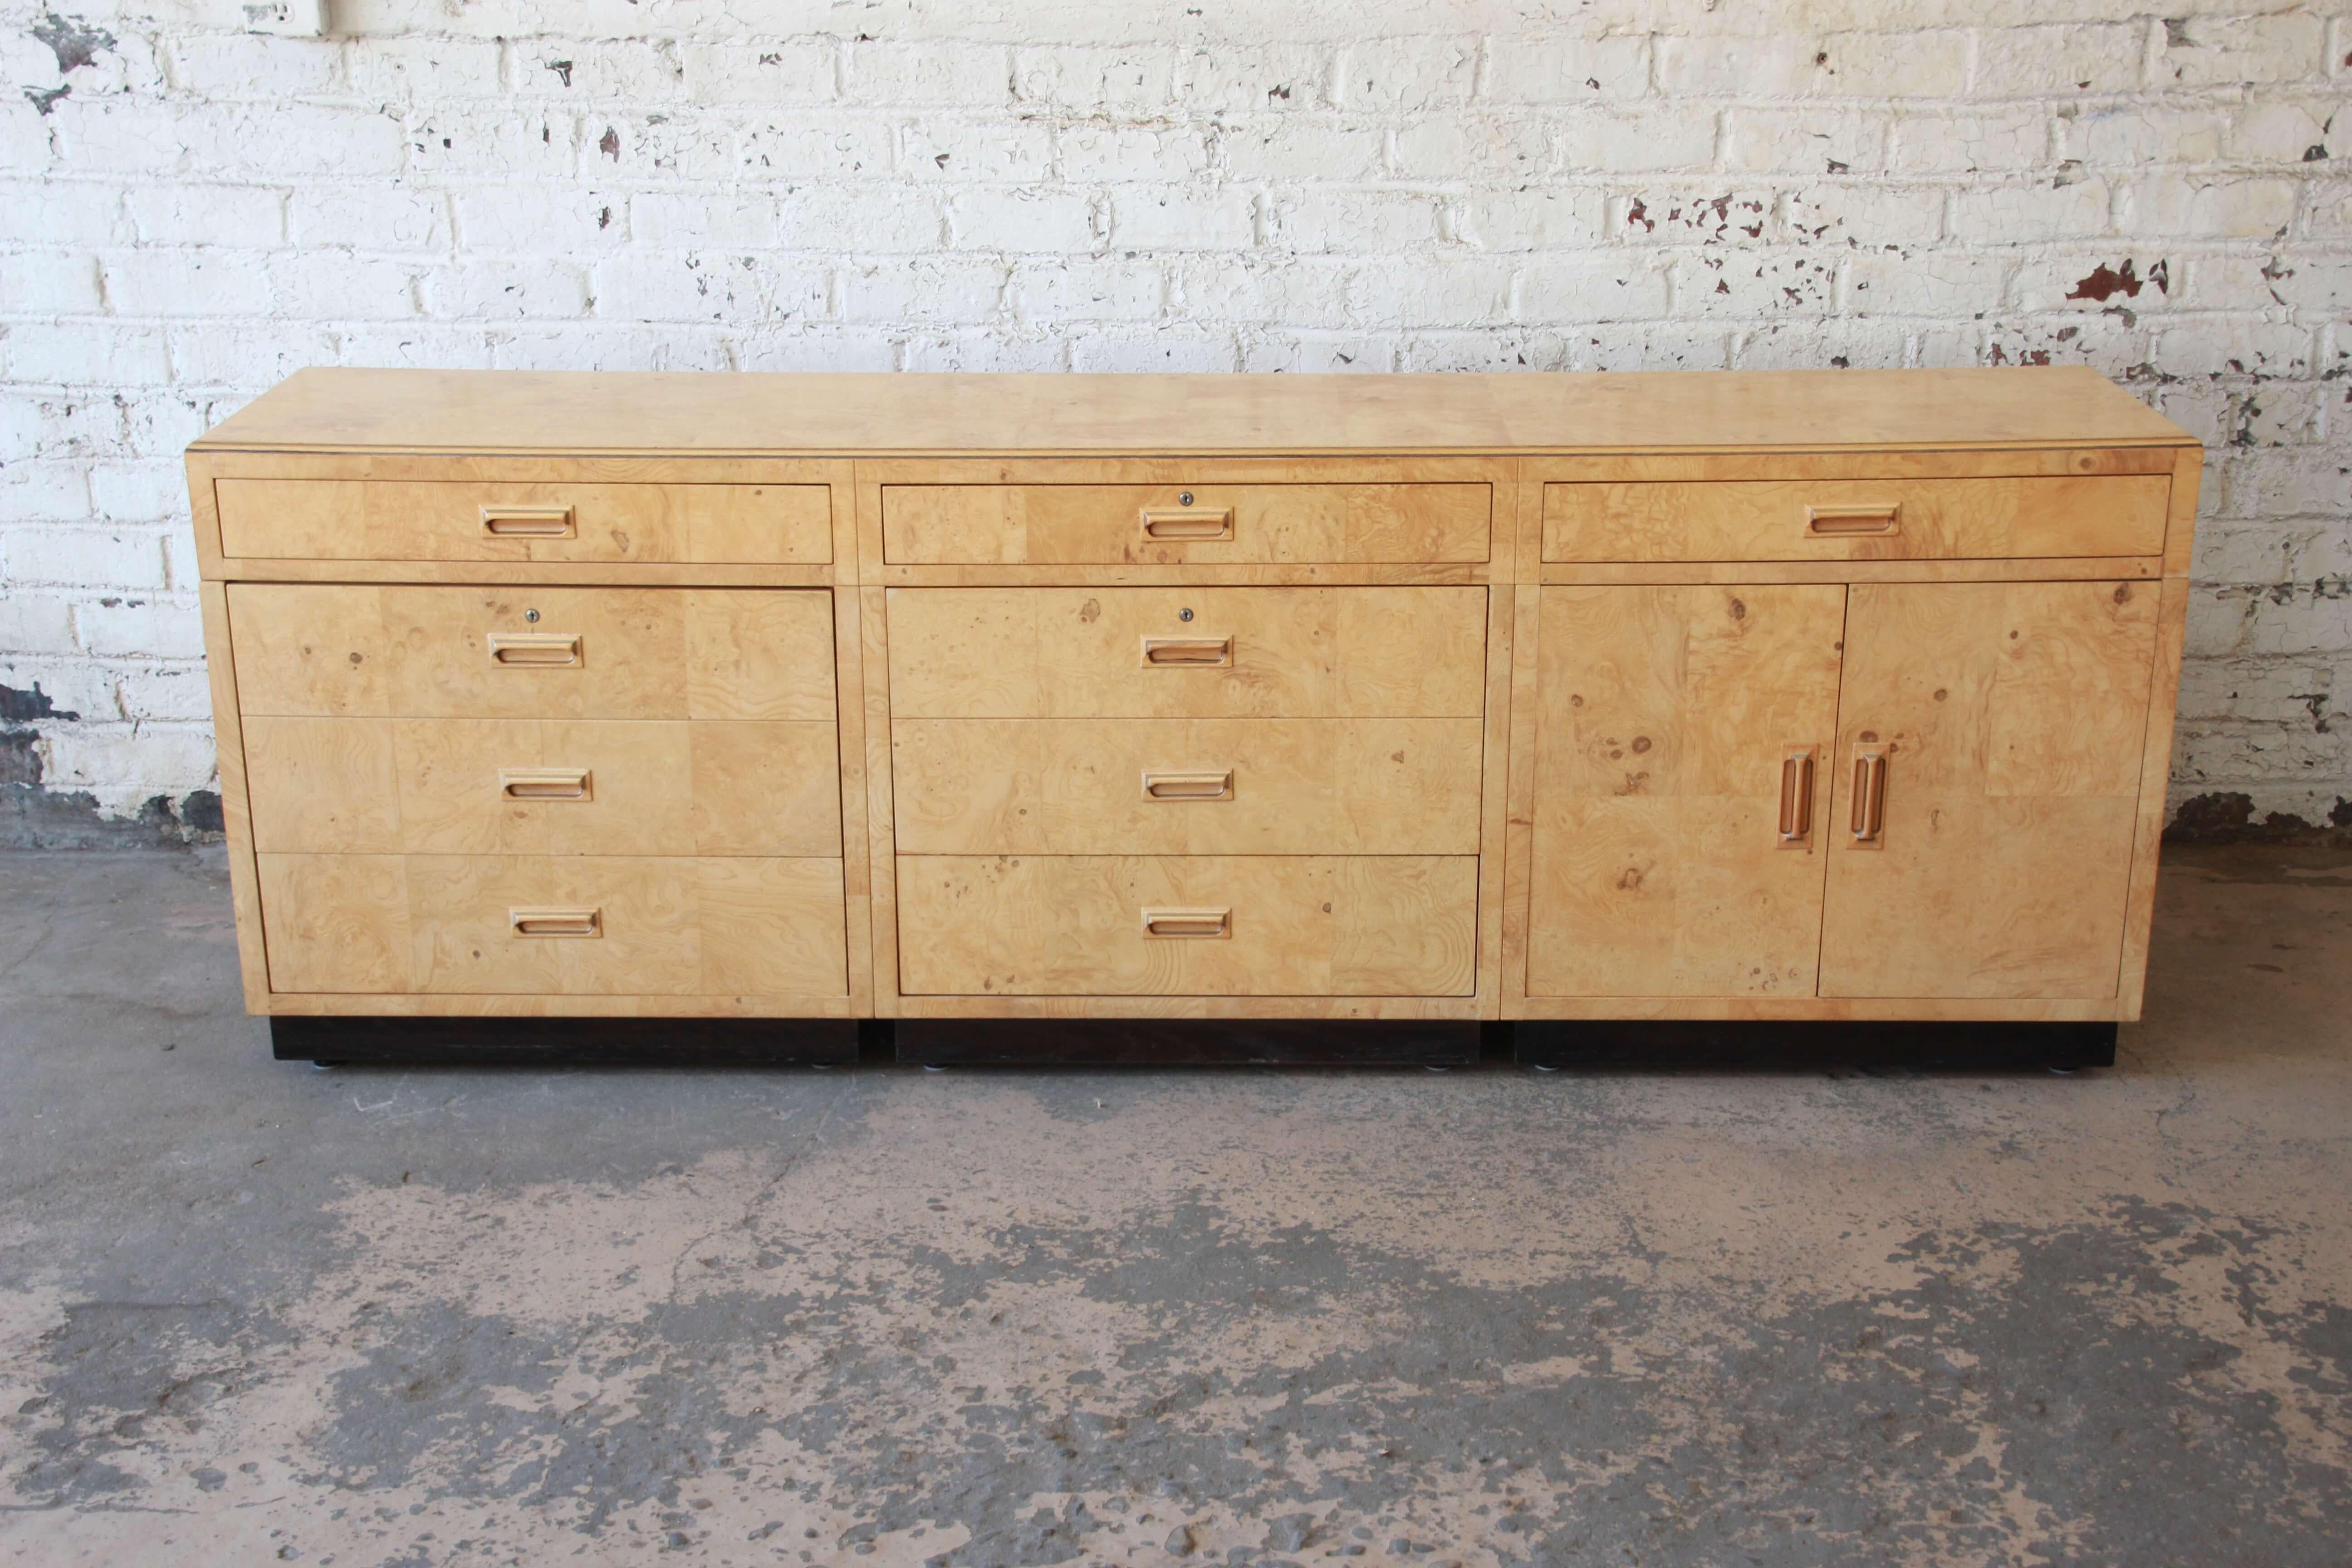 Offering a stylish long burl wood credenza or bar cabinet in the style of Milo Baughman by Henredon Furniture. The piece features three locking drawers, two very large double drawers for storing files or liquor. There are a total of seven drawers